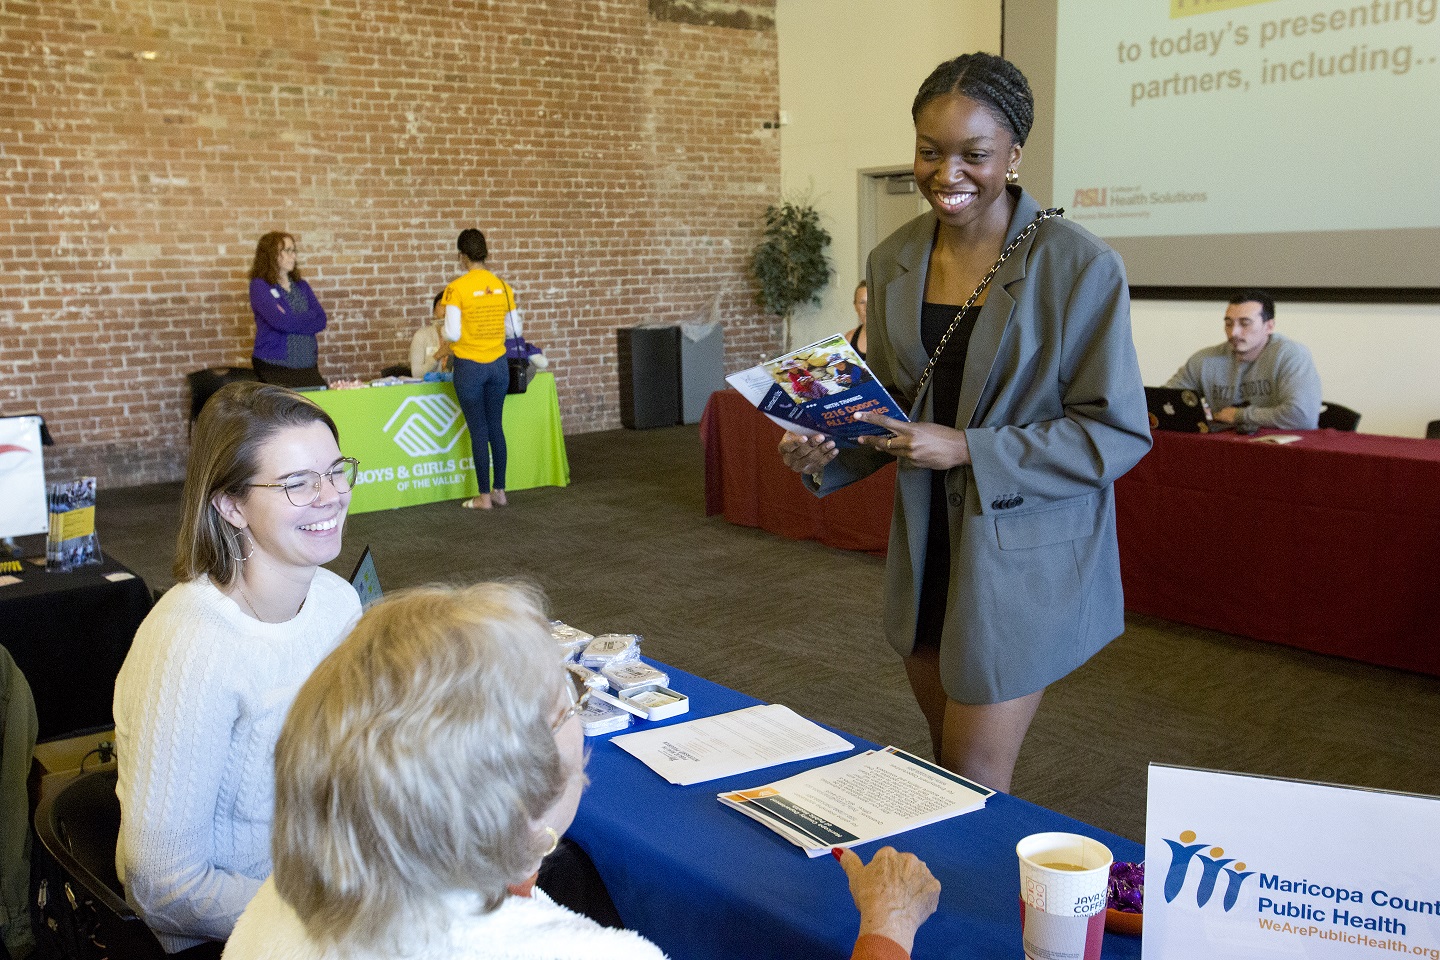 A student smiles and talks with presenters at a table in a large room.